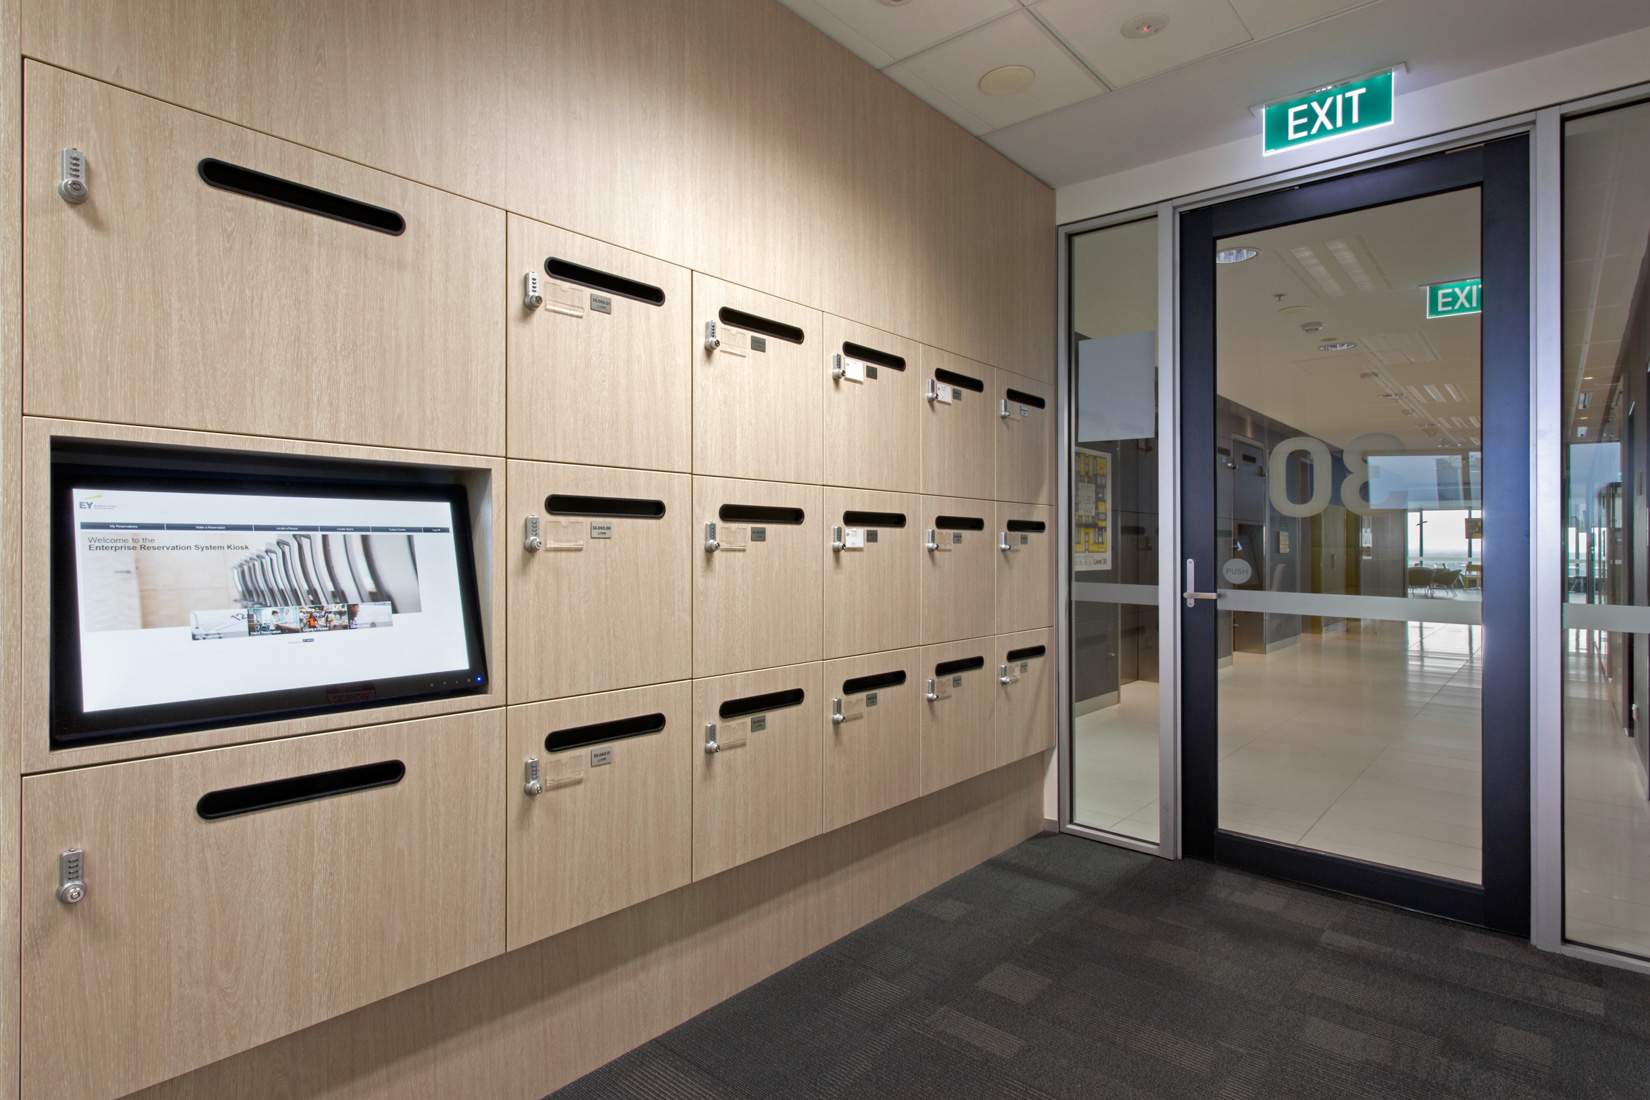 ISM Interiors built 1,850 custom locker banks, each one unique from the next, for the Ernst & Young office.